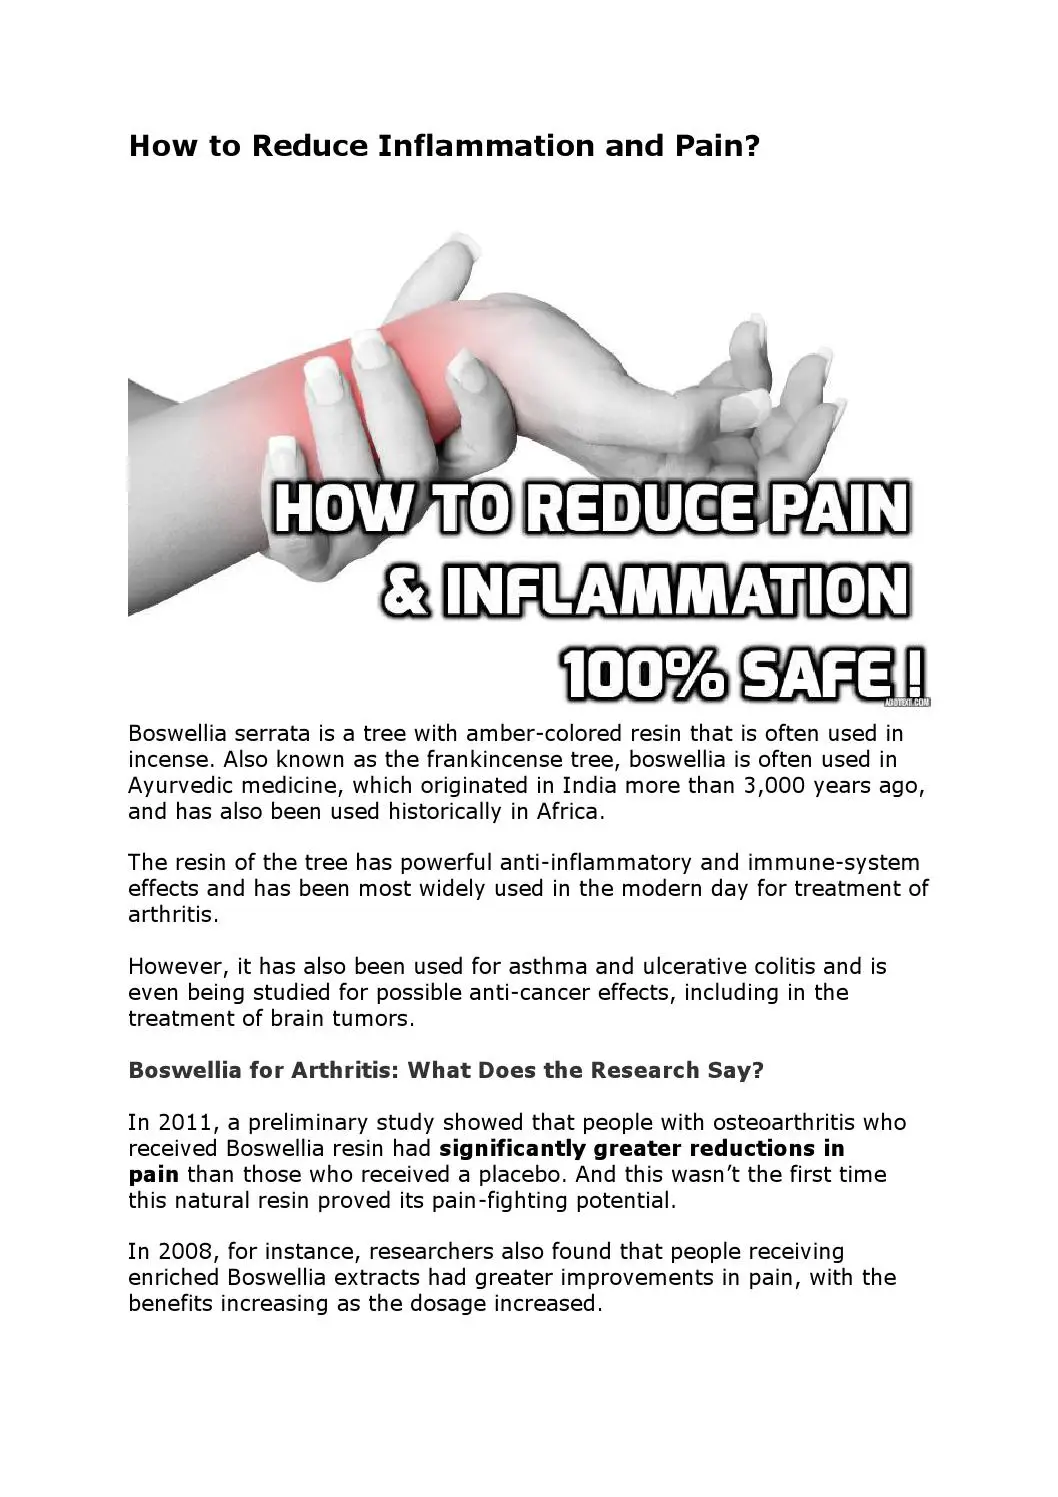 How to reduce inflammation and pain by how2stayyoung